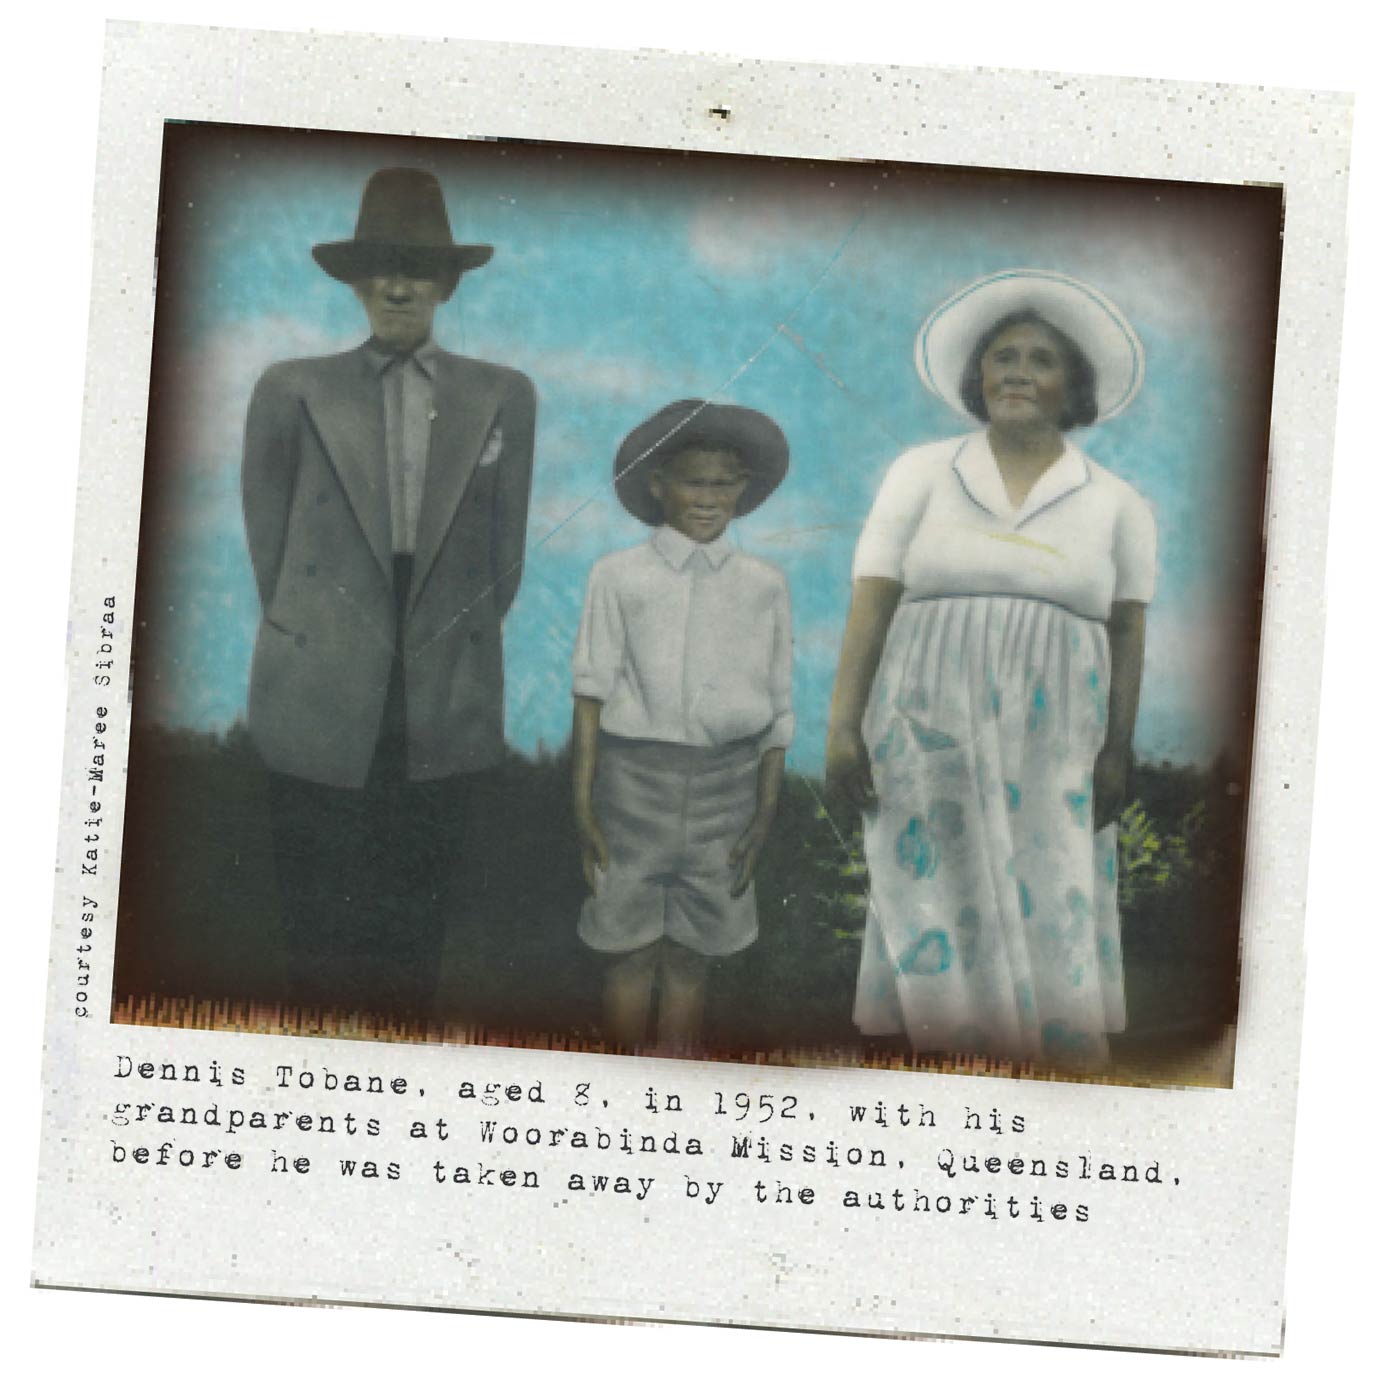 A black and white Polaroid photograph portraying three people in a standing position. From left to right, there is an elderly man wearing dark trousers with a light grey blazer, shirt and hat; a young boy who has his hands firmly by his side - he is also wearing a hat - and an elderly woman wearing a light coloured skirt, white shirt and a white hat. Typewritten text underneath reads: 'Dennis Tobane, aged 8, in 1952, with his grandparents at Woorabinda Mission, Queensland, before he was taken away by the authorities'. In smaller text, on the left-hand side of the image, in a vertical direction, reads: 'Courtesy Katie-Maree Sibraa.' - click to view larger image